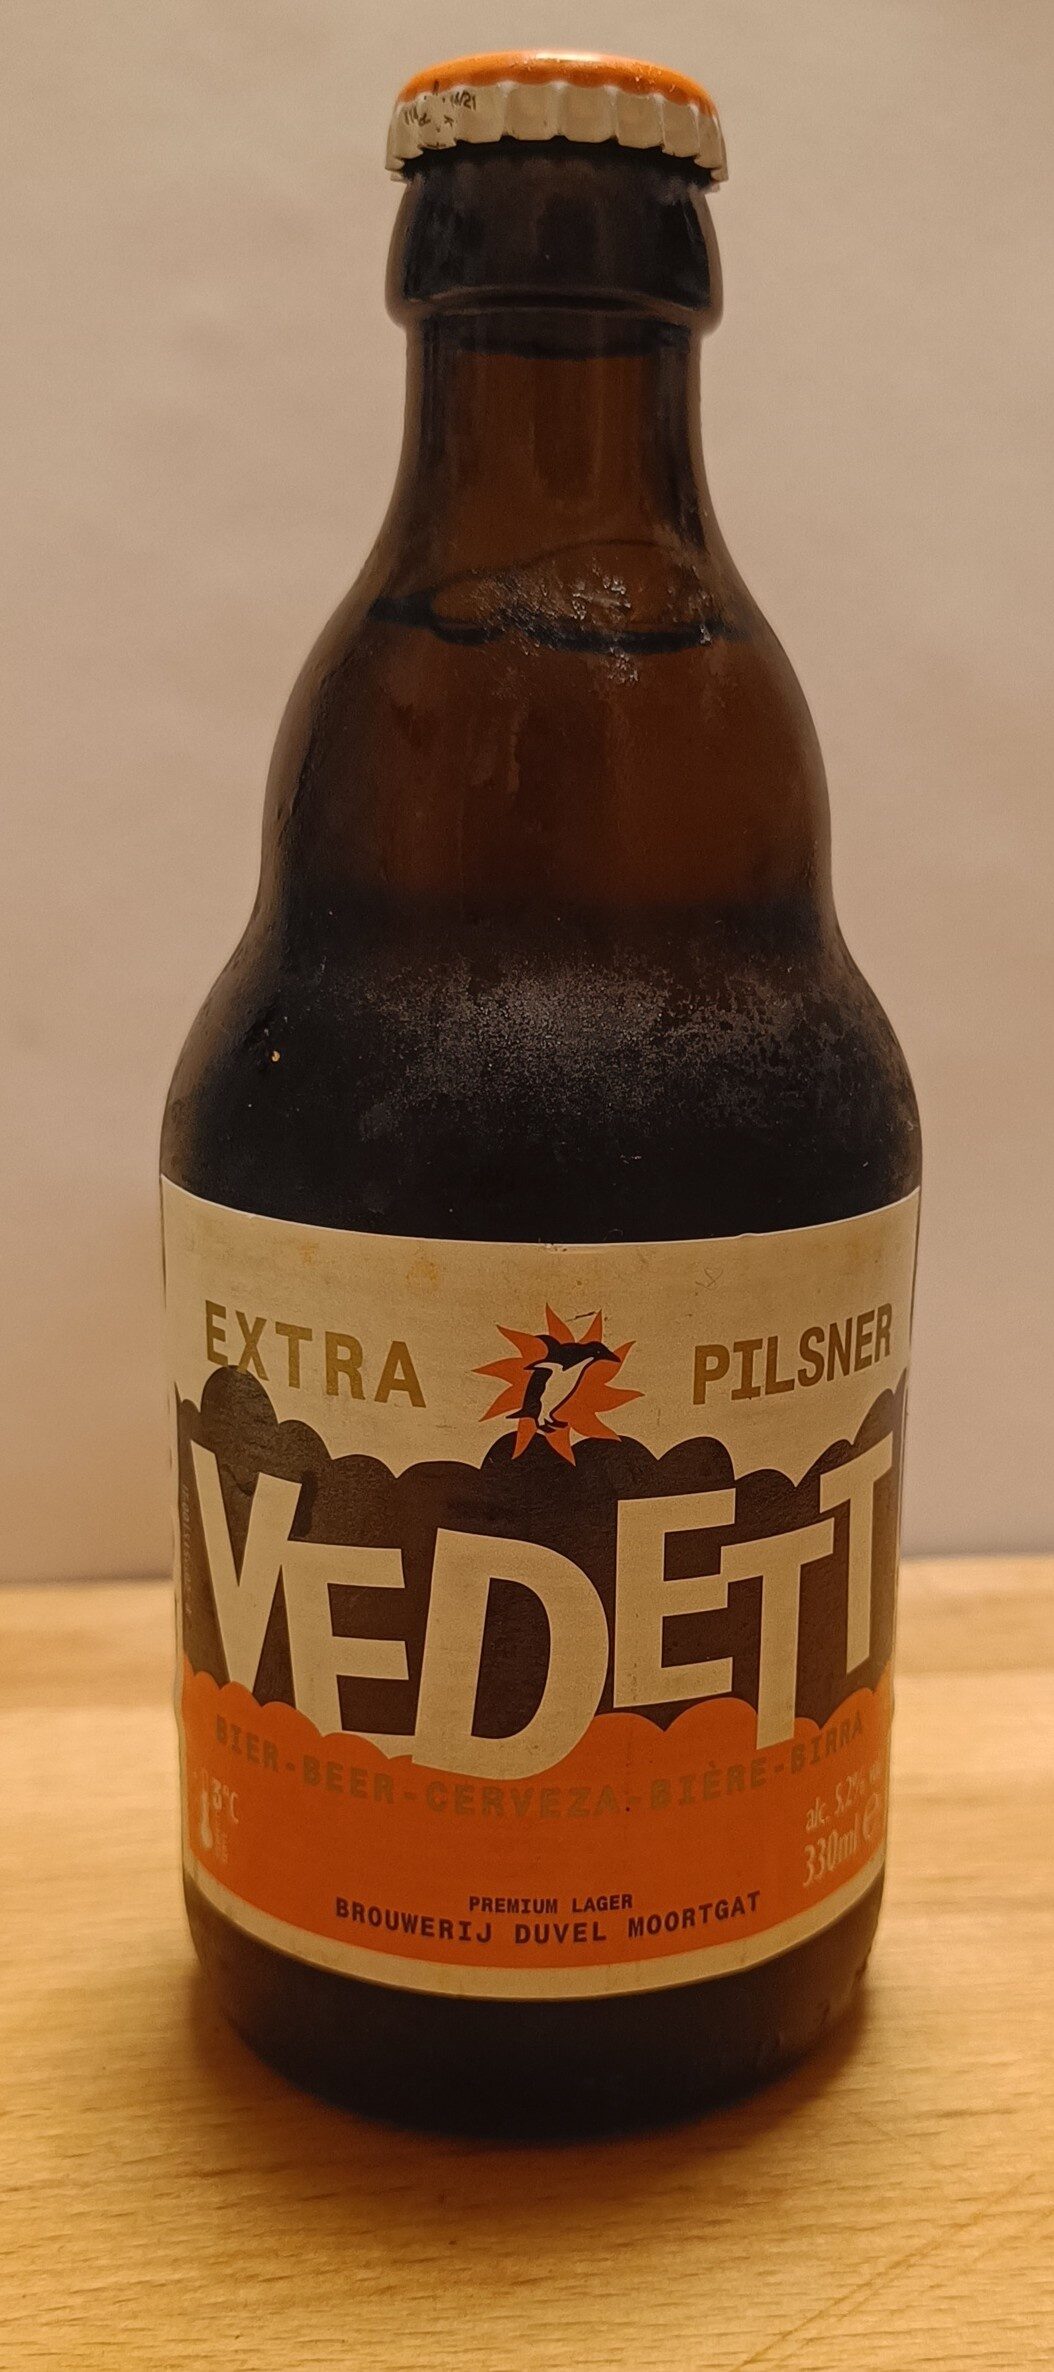 Vedett Extra Blond - Product - fr